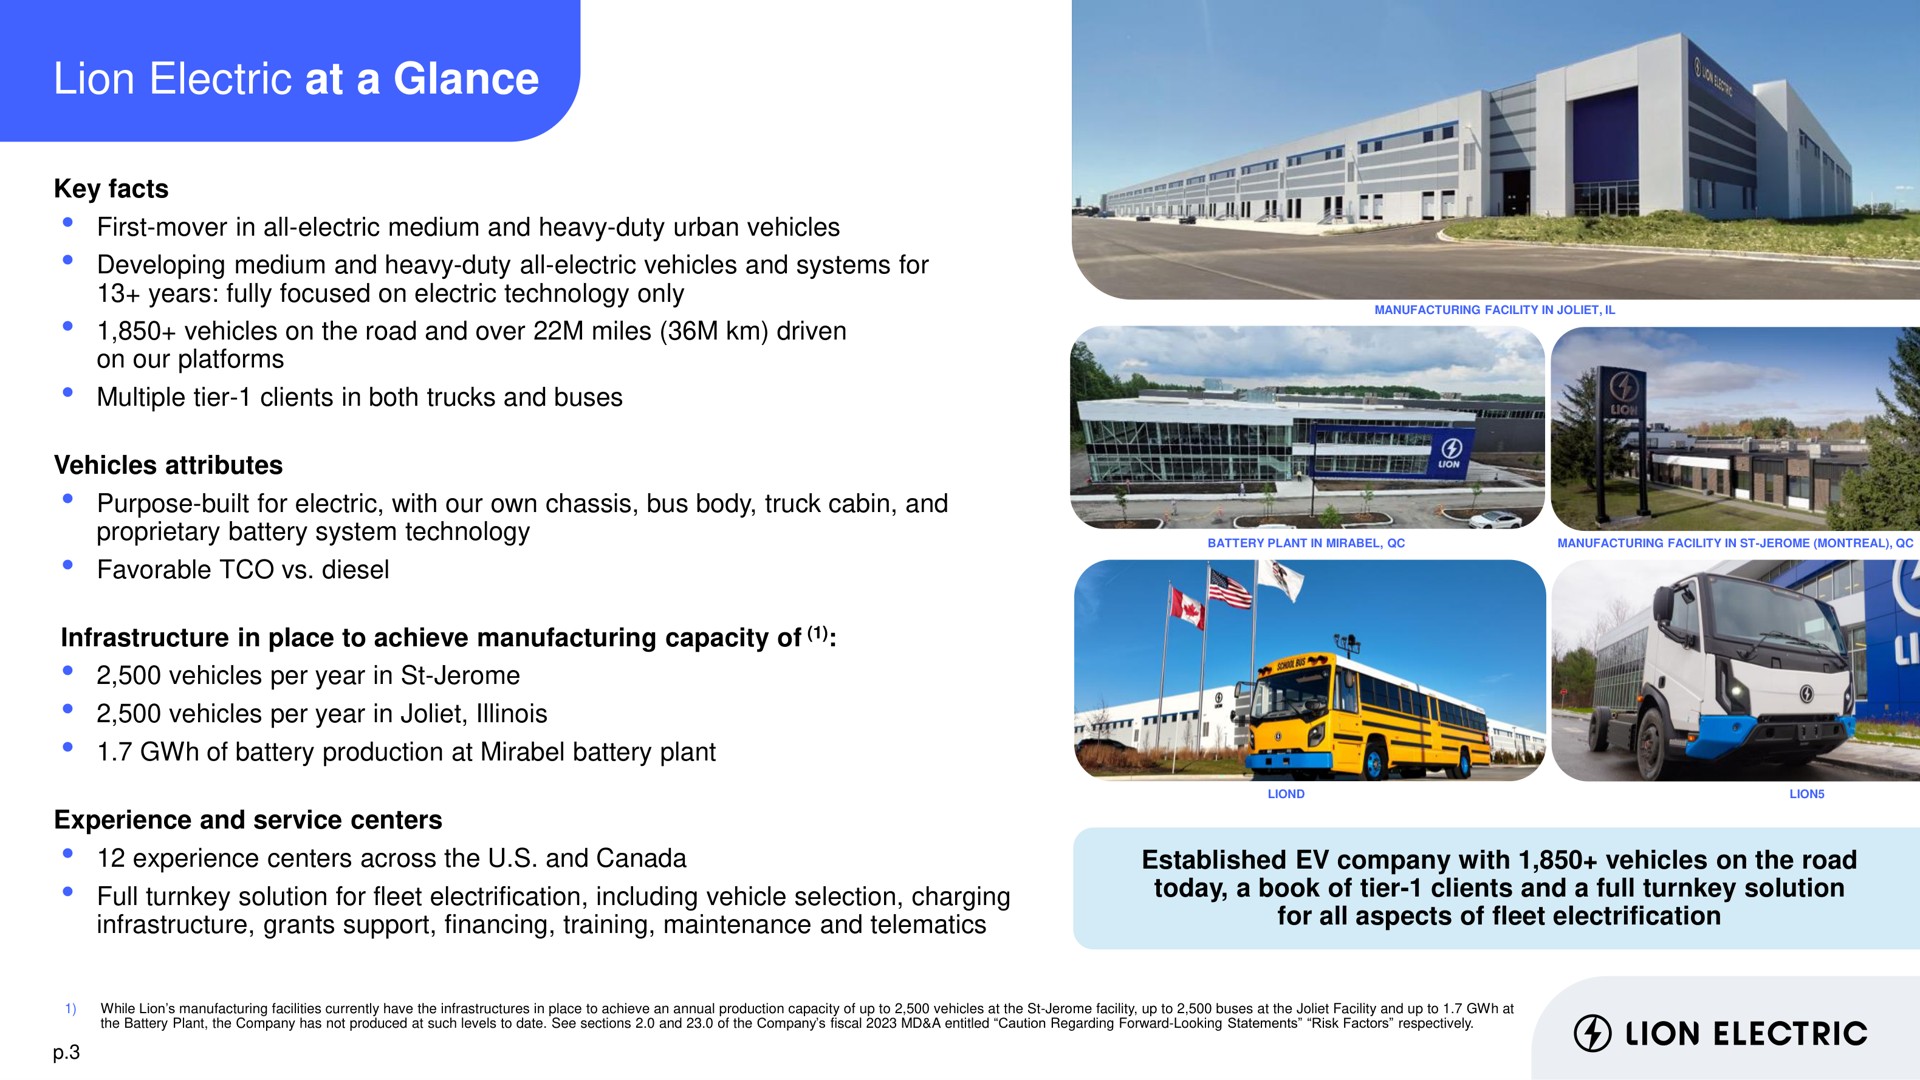 lion electric at a glance key facts first mover in all electric medium and heavy duty urban vehicles developing medium and heavy duty all electric vehicles and systems for years fully focused on electric technology only vehicles on the road and over miles driven on our platforms multiple tier clients in both trucks and buses vehicles attributes purpose built for electric with our own chassis bus body truck cabin and proprietary battery system technology favorable diesel infrastructure in place to achieve manufacturing capacity of vehicles per year in vehicles per year in of battery production at battery plant experience and service centers experience centers across the and canada full turnkey solution for fleet electrification including vehicle selection charging infrastructure grants support financing training maintenance and established company with vehicles on the road today a book of tier clients and a full turnkey solution for all aspects of fleet electrification | Lion Electric